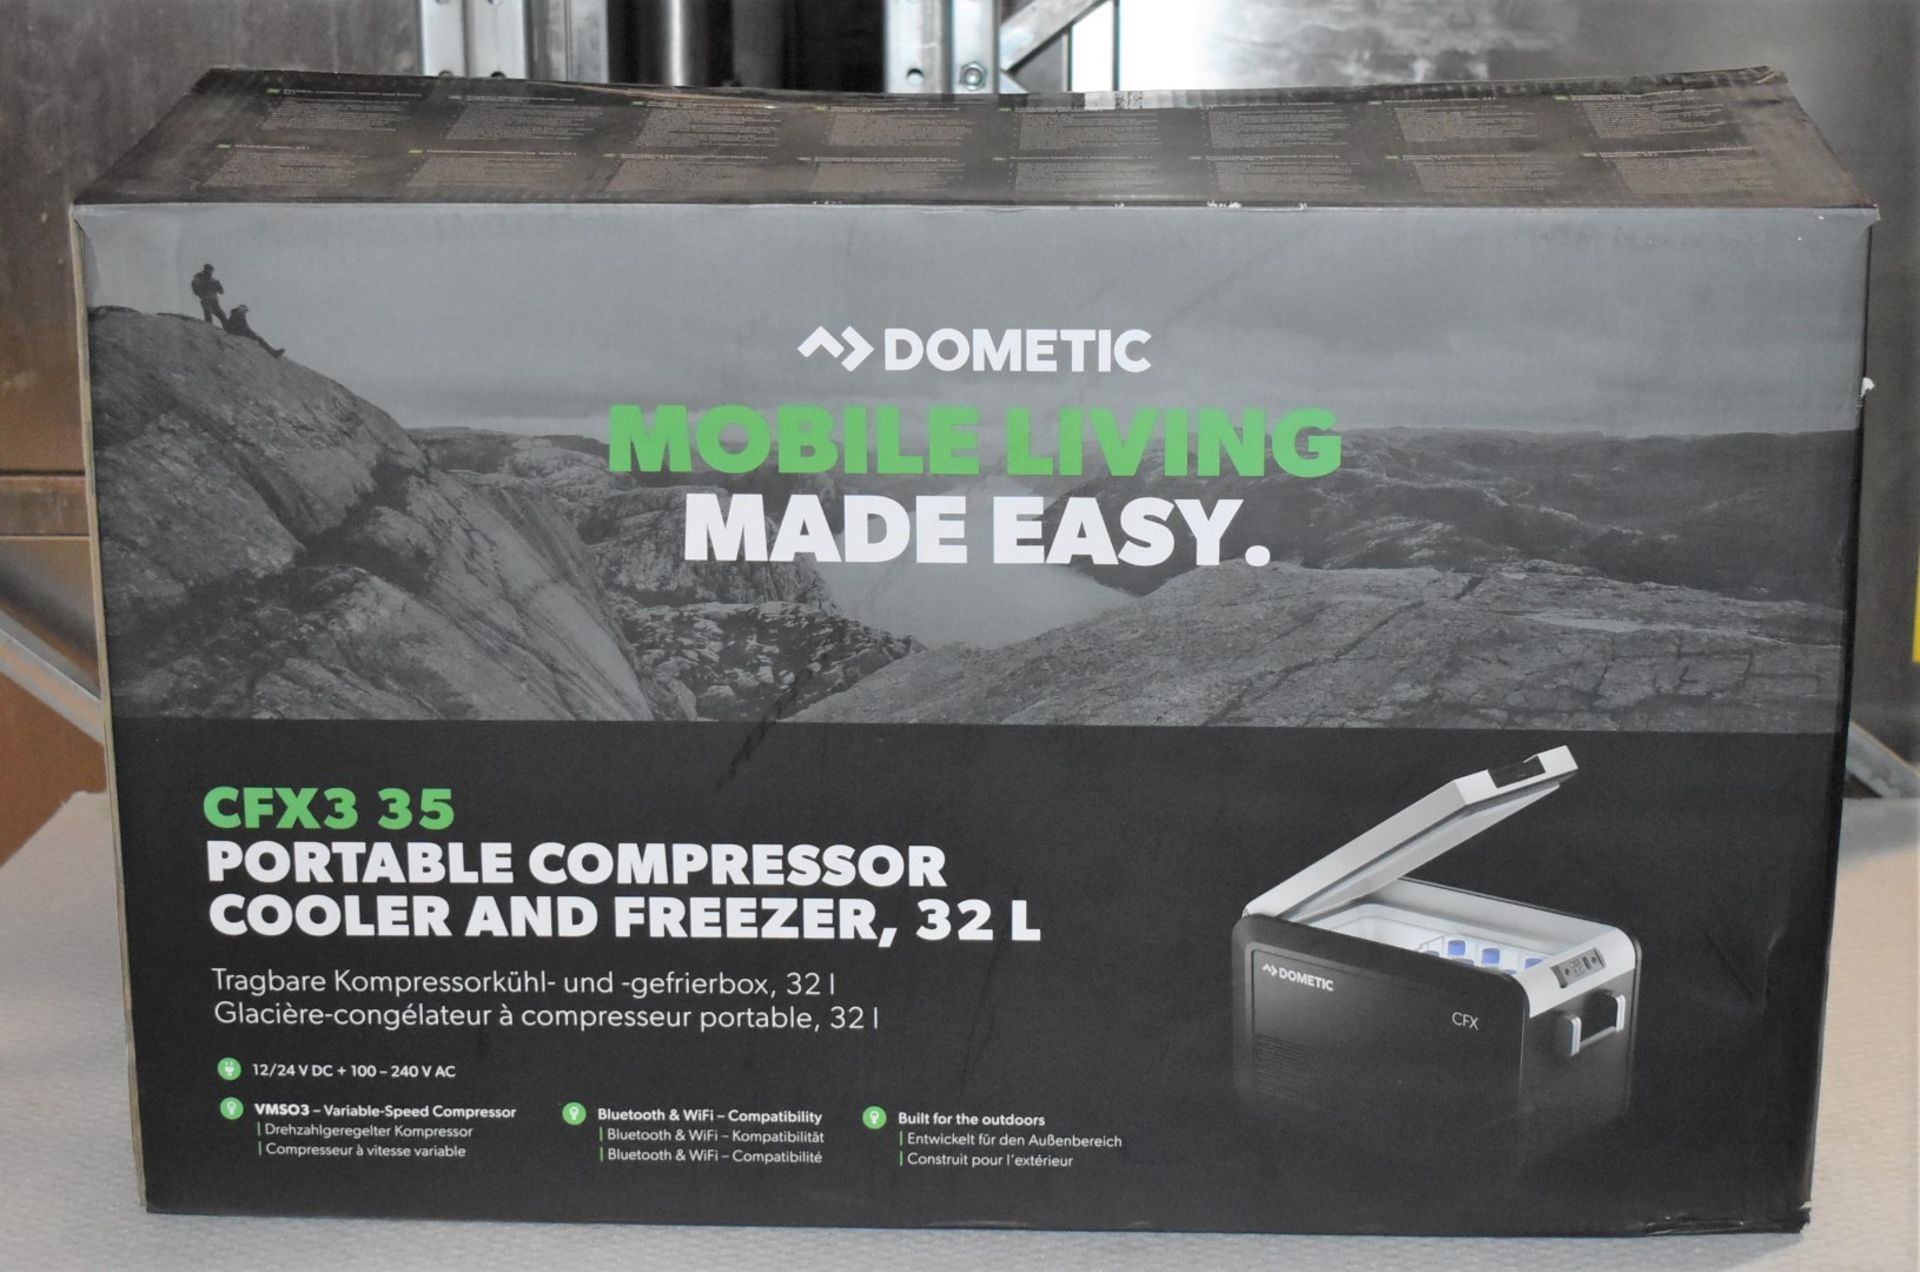 1 x Dometic CFX3 35 Portable Compressor Cooler / Freezer - For Camping, Motorhomes, Parties RRP £916 - Image 4 of 9